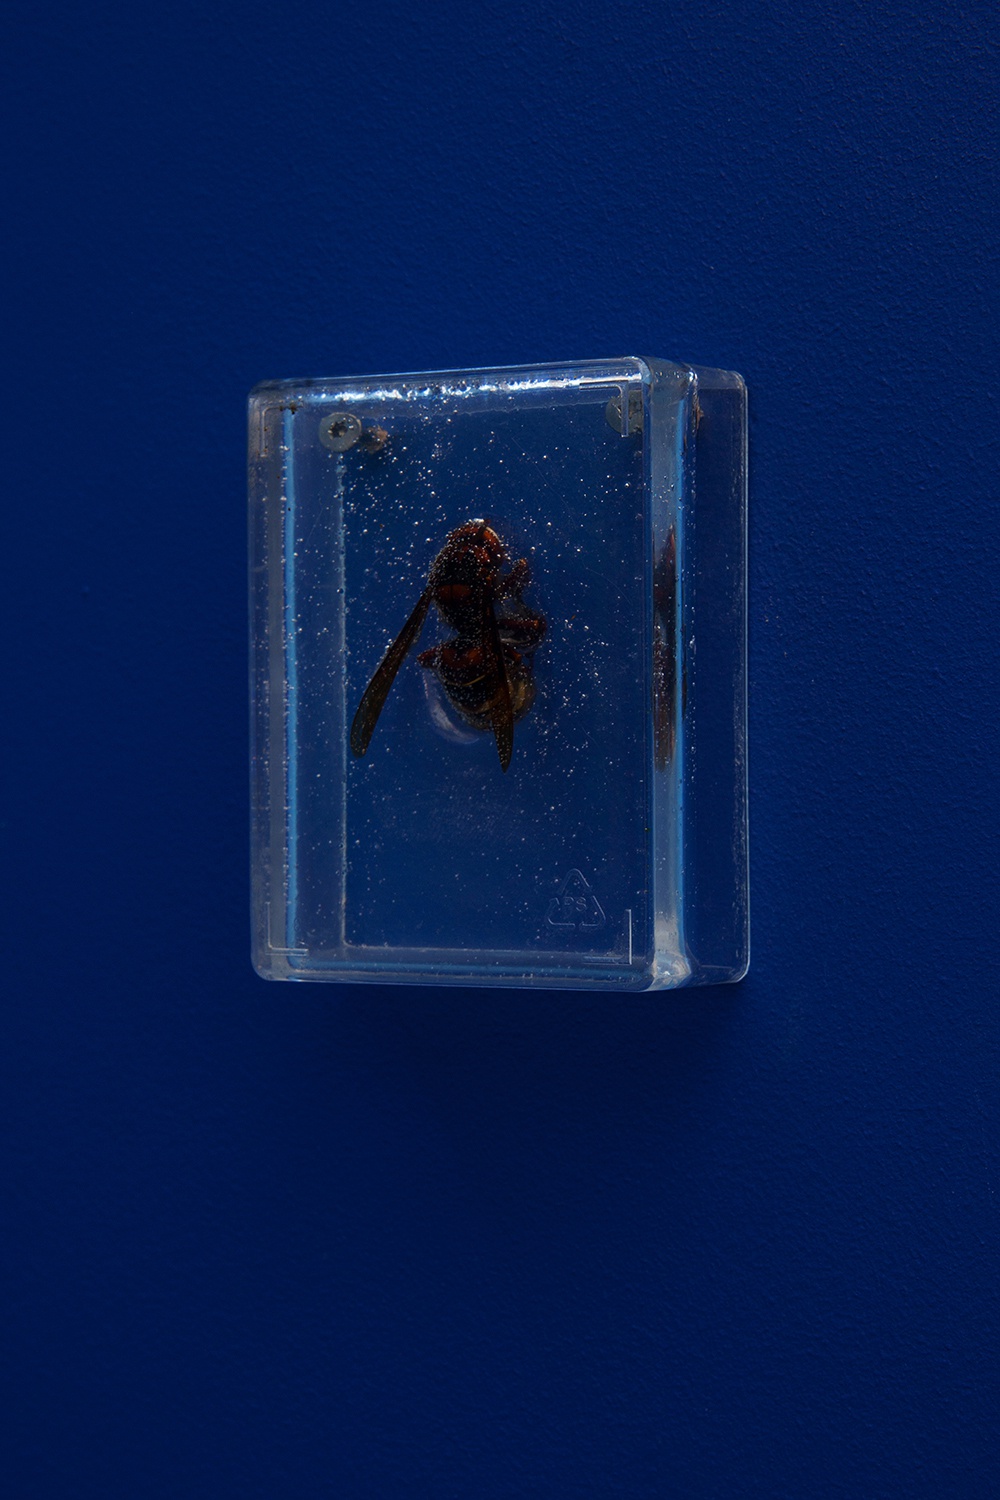 Richard Sides, The Physical Impossibility of Life in the Mind of Someone Living, 2021hornet, epoxy resin, plastic7,5 x 5,5 x 3 cm